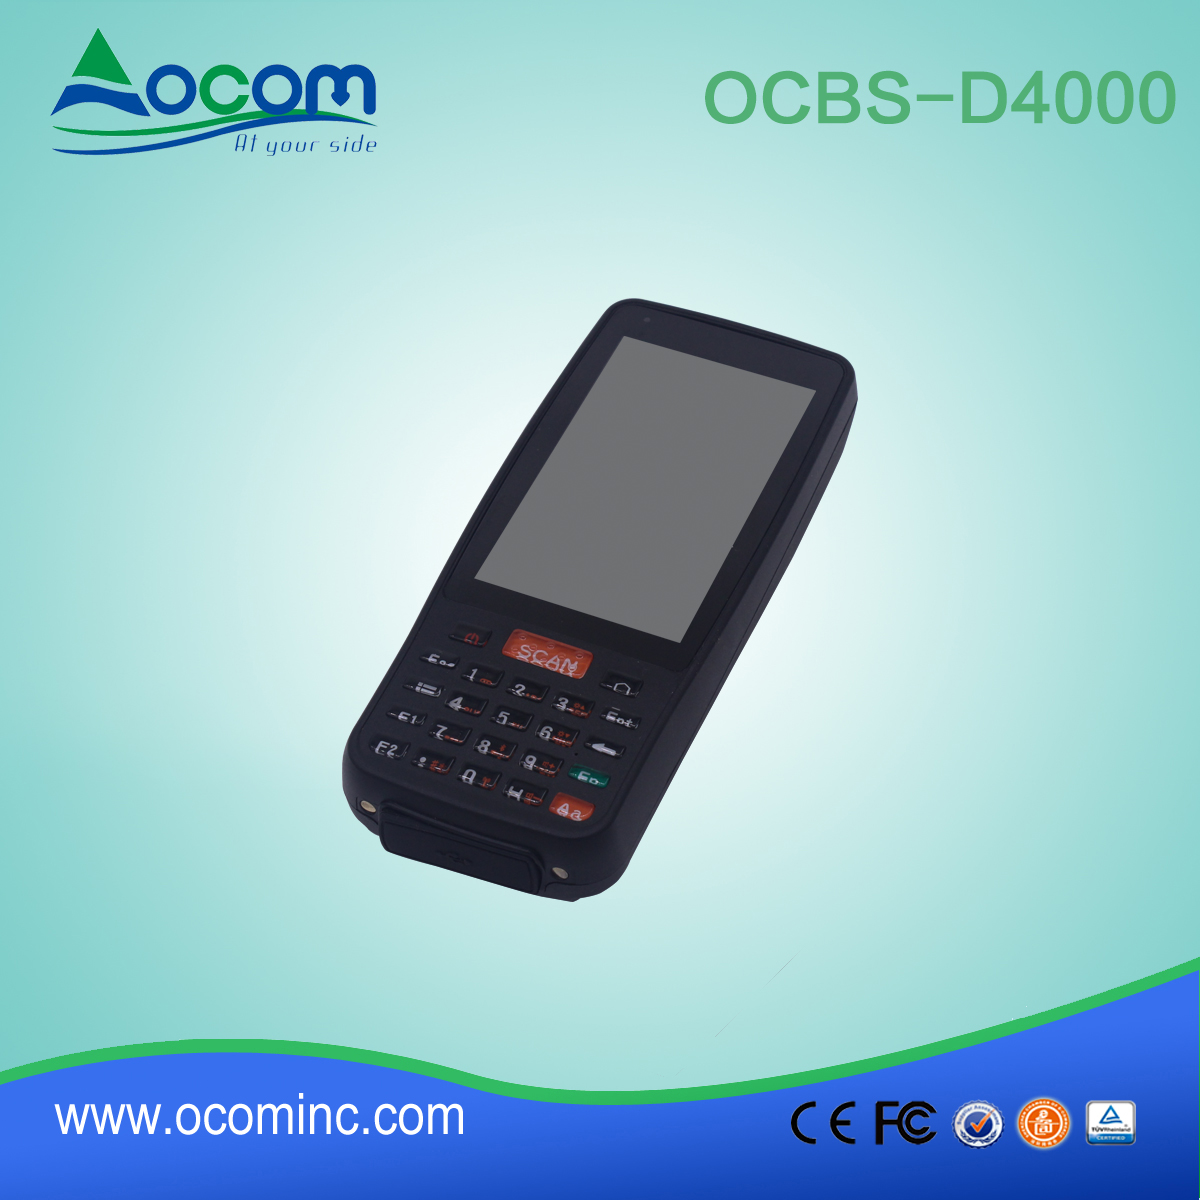 OCBS-D4000 Handheld Android Mobile PDA Device Barcode Scanner PDA